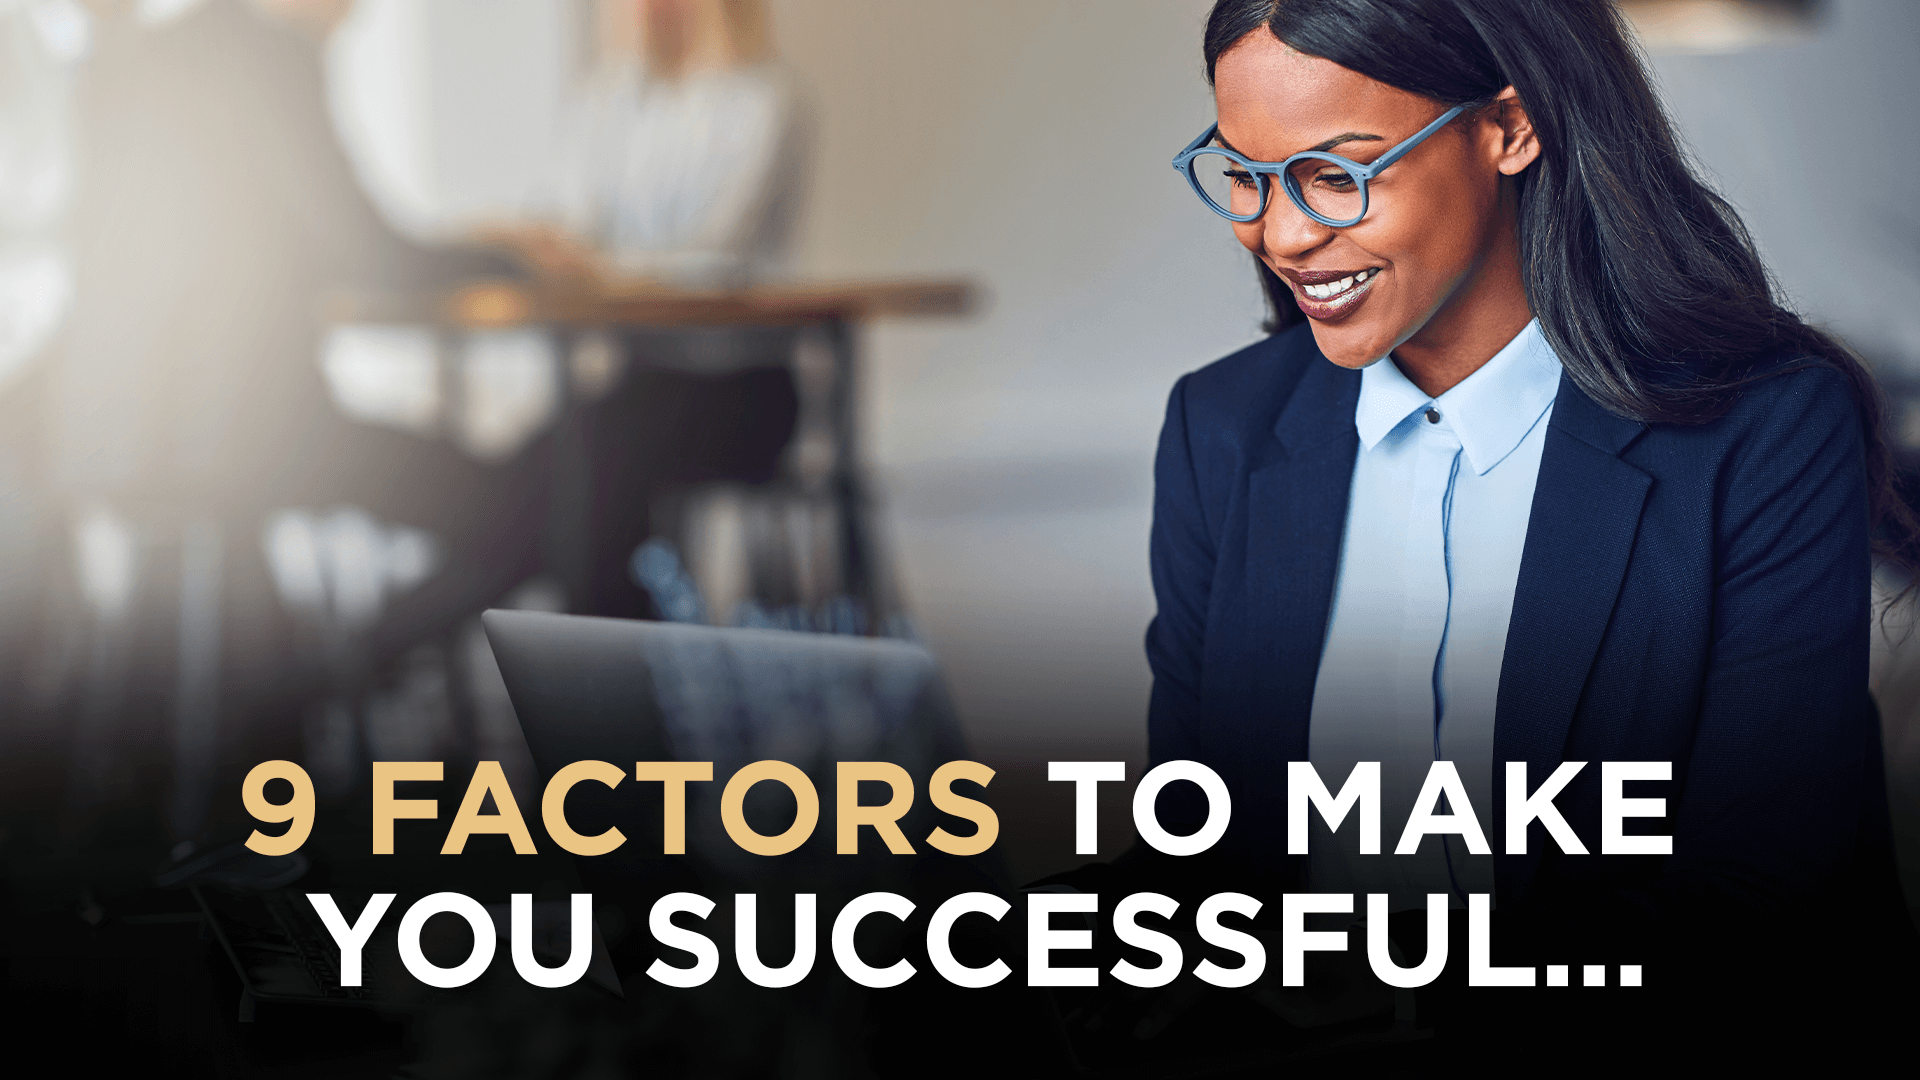 9 Factors To Make YOU Successful